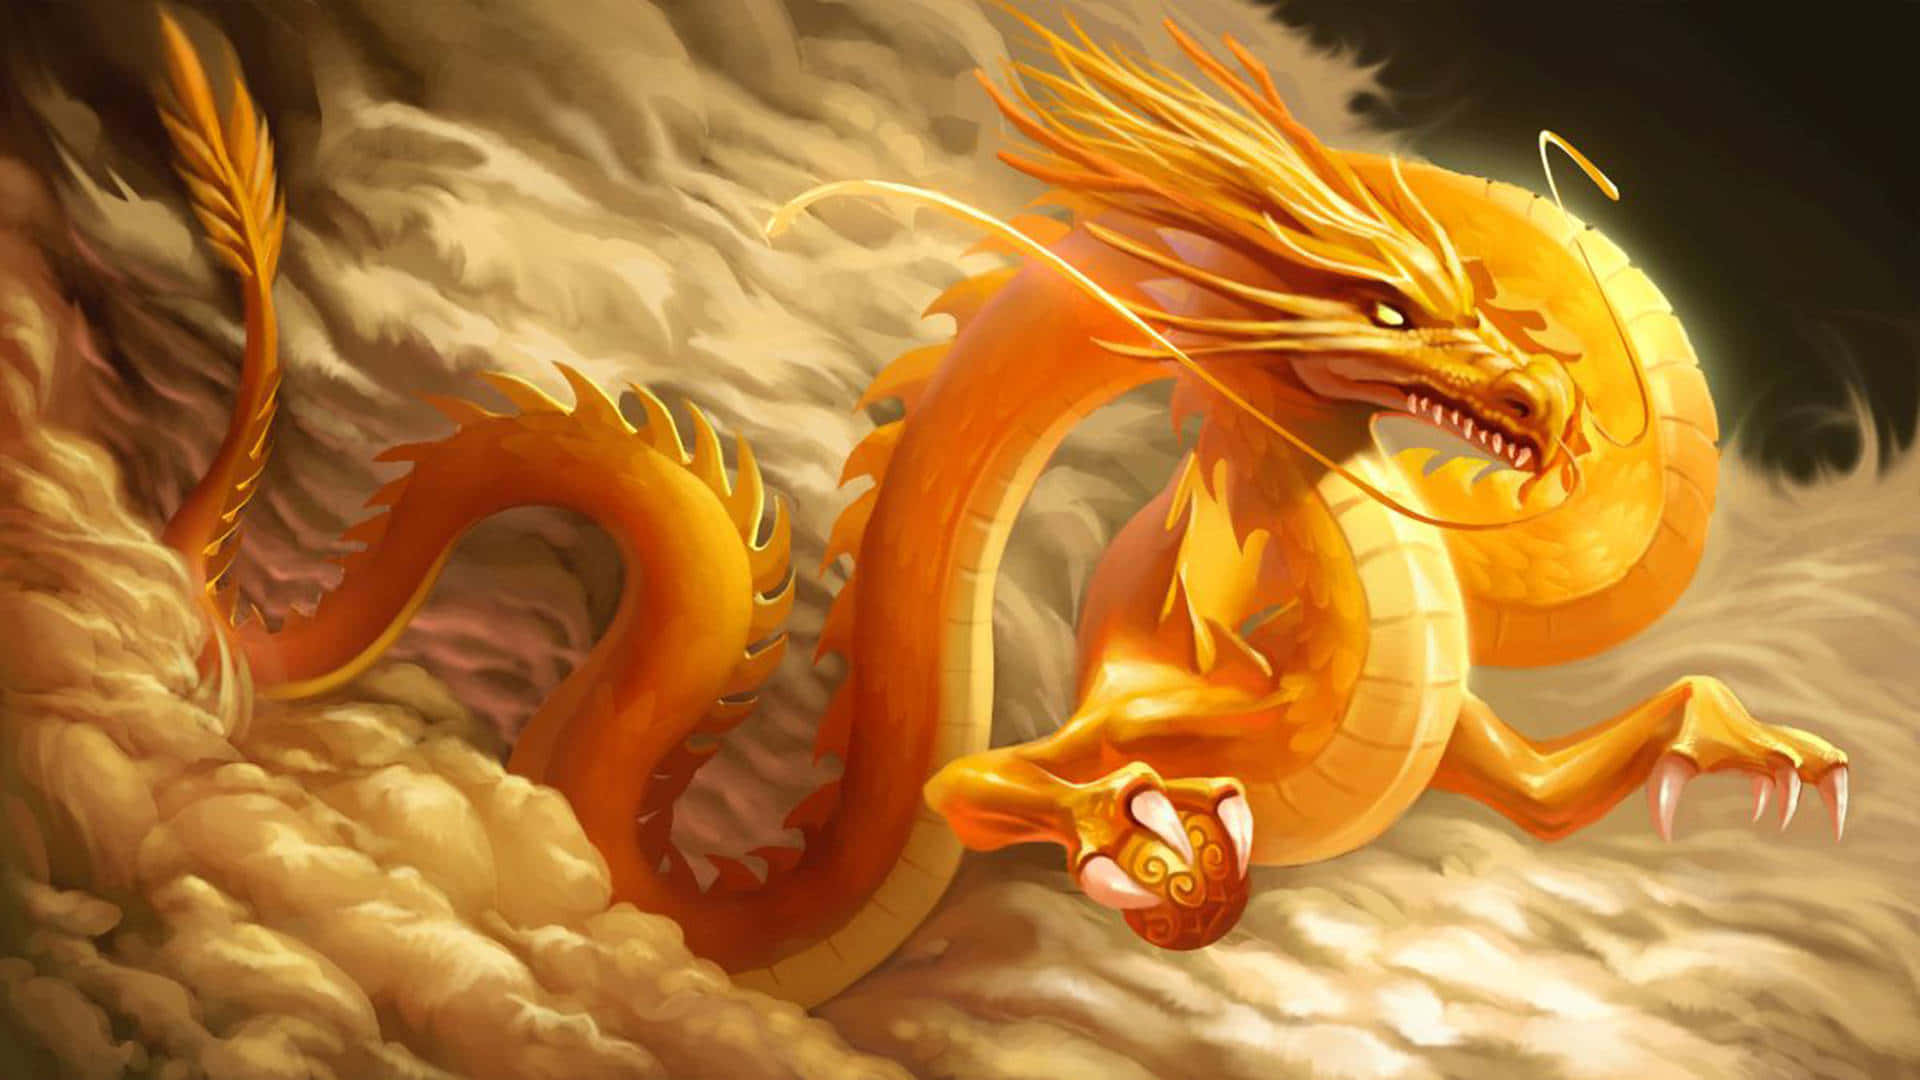 Golden Yellow Dragon Anime In The Clouds Wallpaper